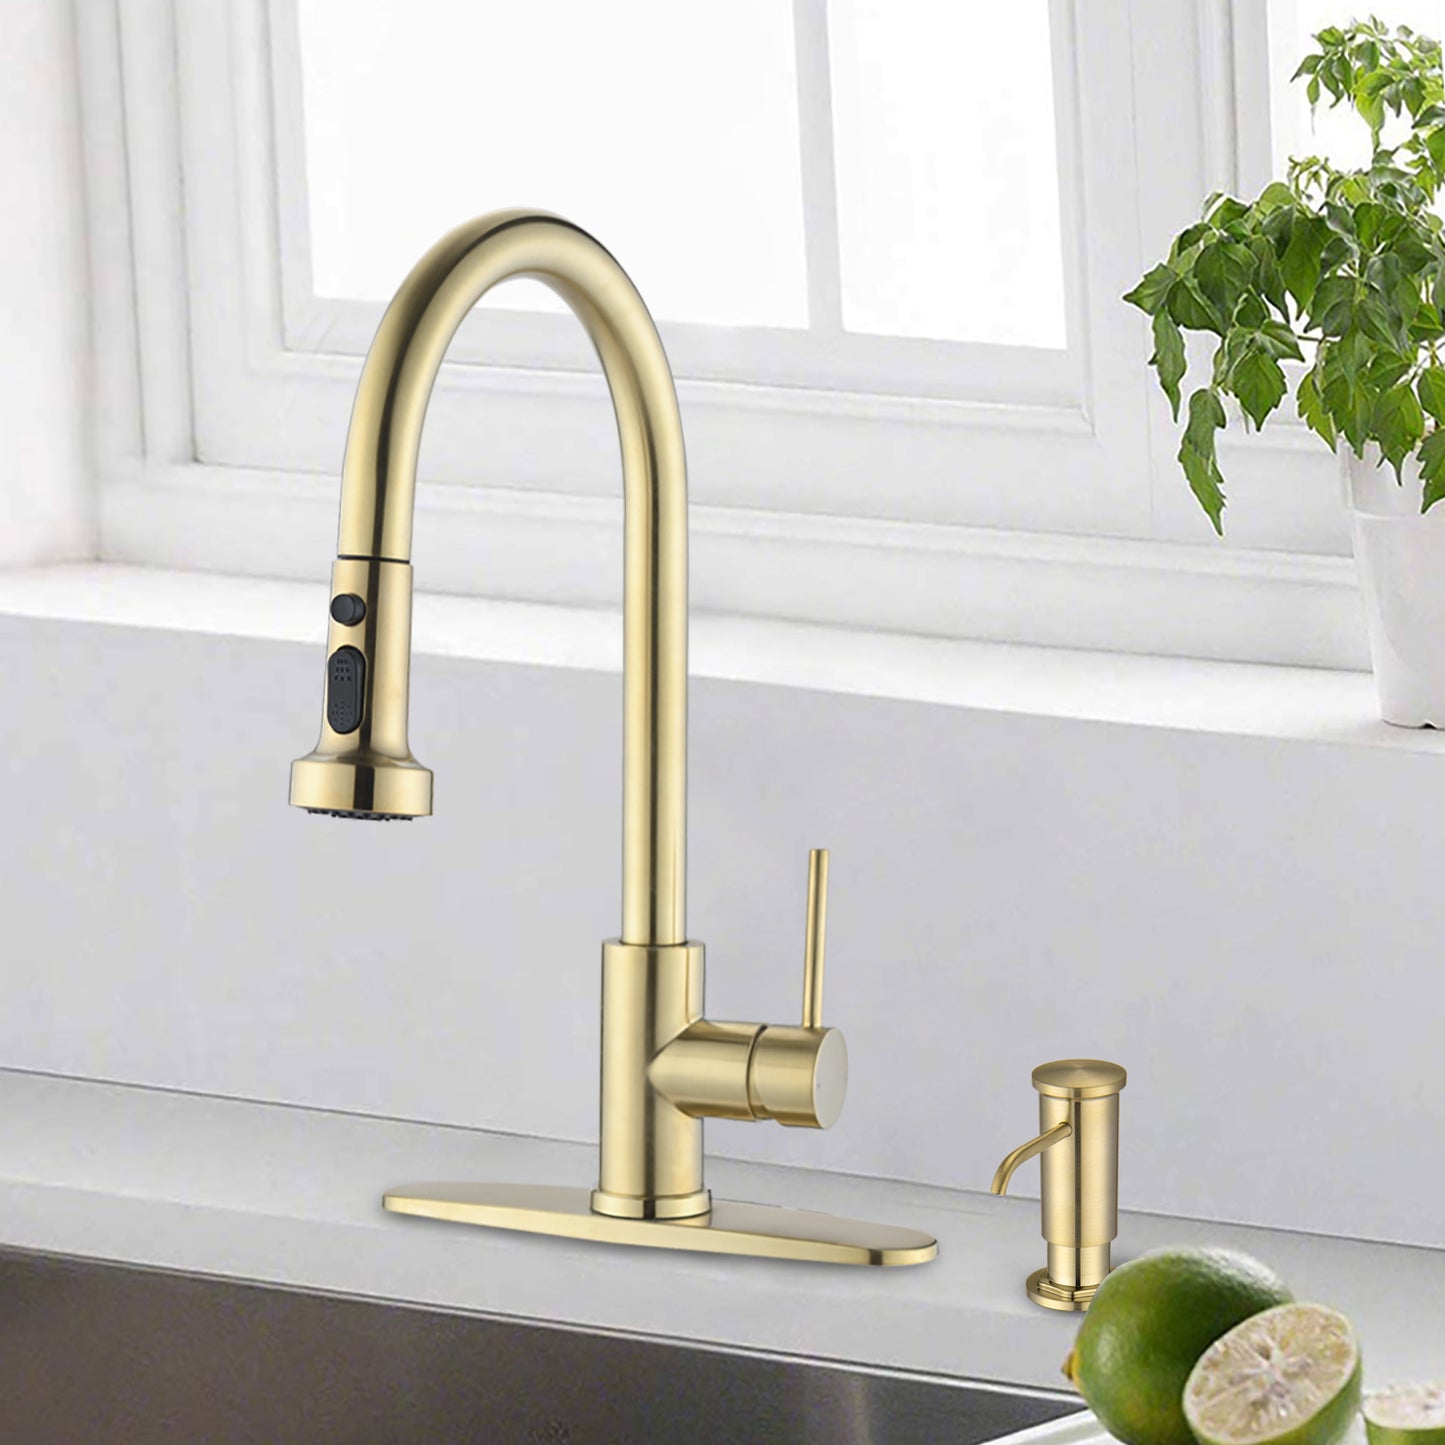 Stainless Steel Pull Down Kitchen Faucet with Soap Dispenser Brushed Gold